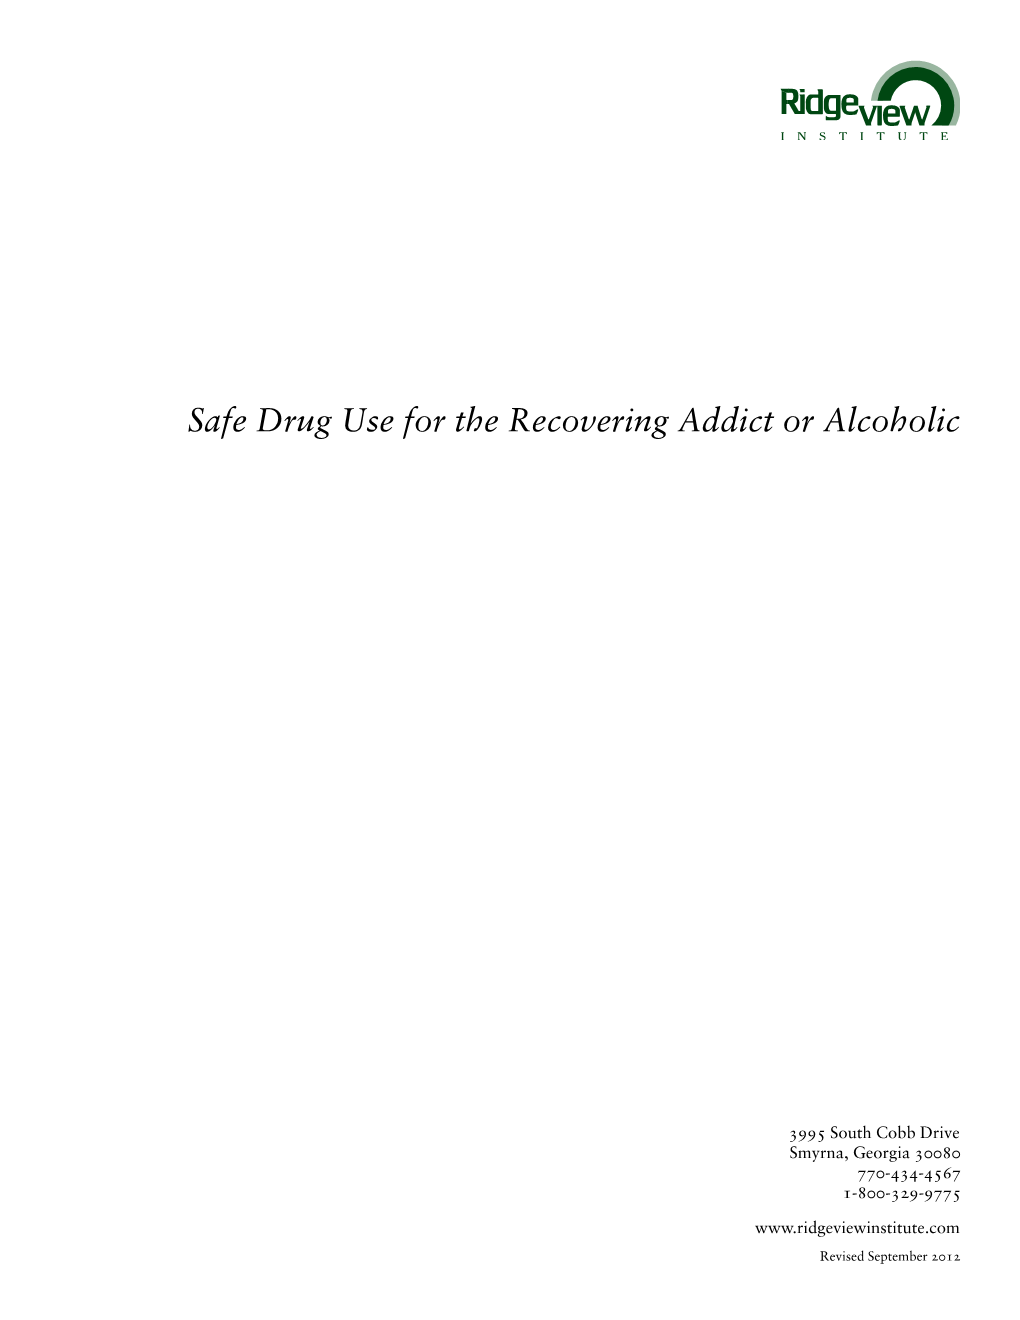 Safe Drug Use for the Recovering Addict Or Alcoholic